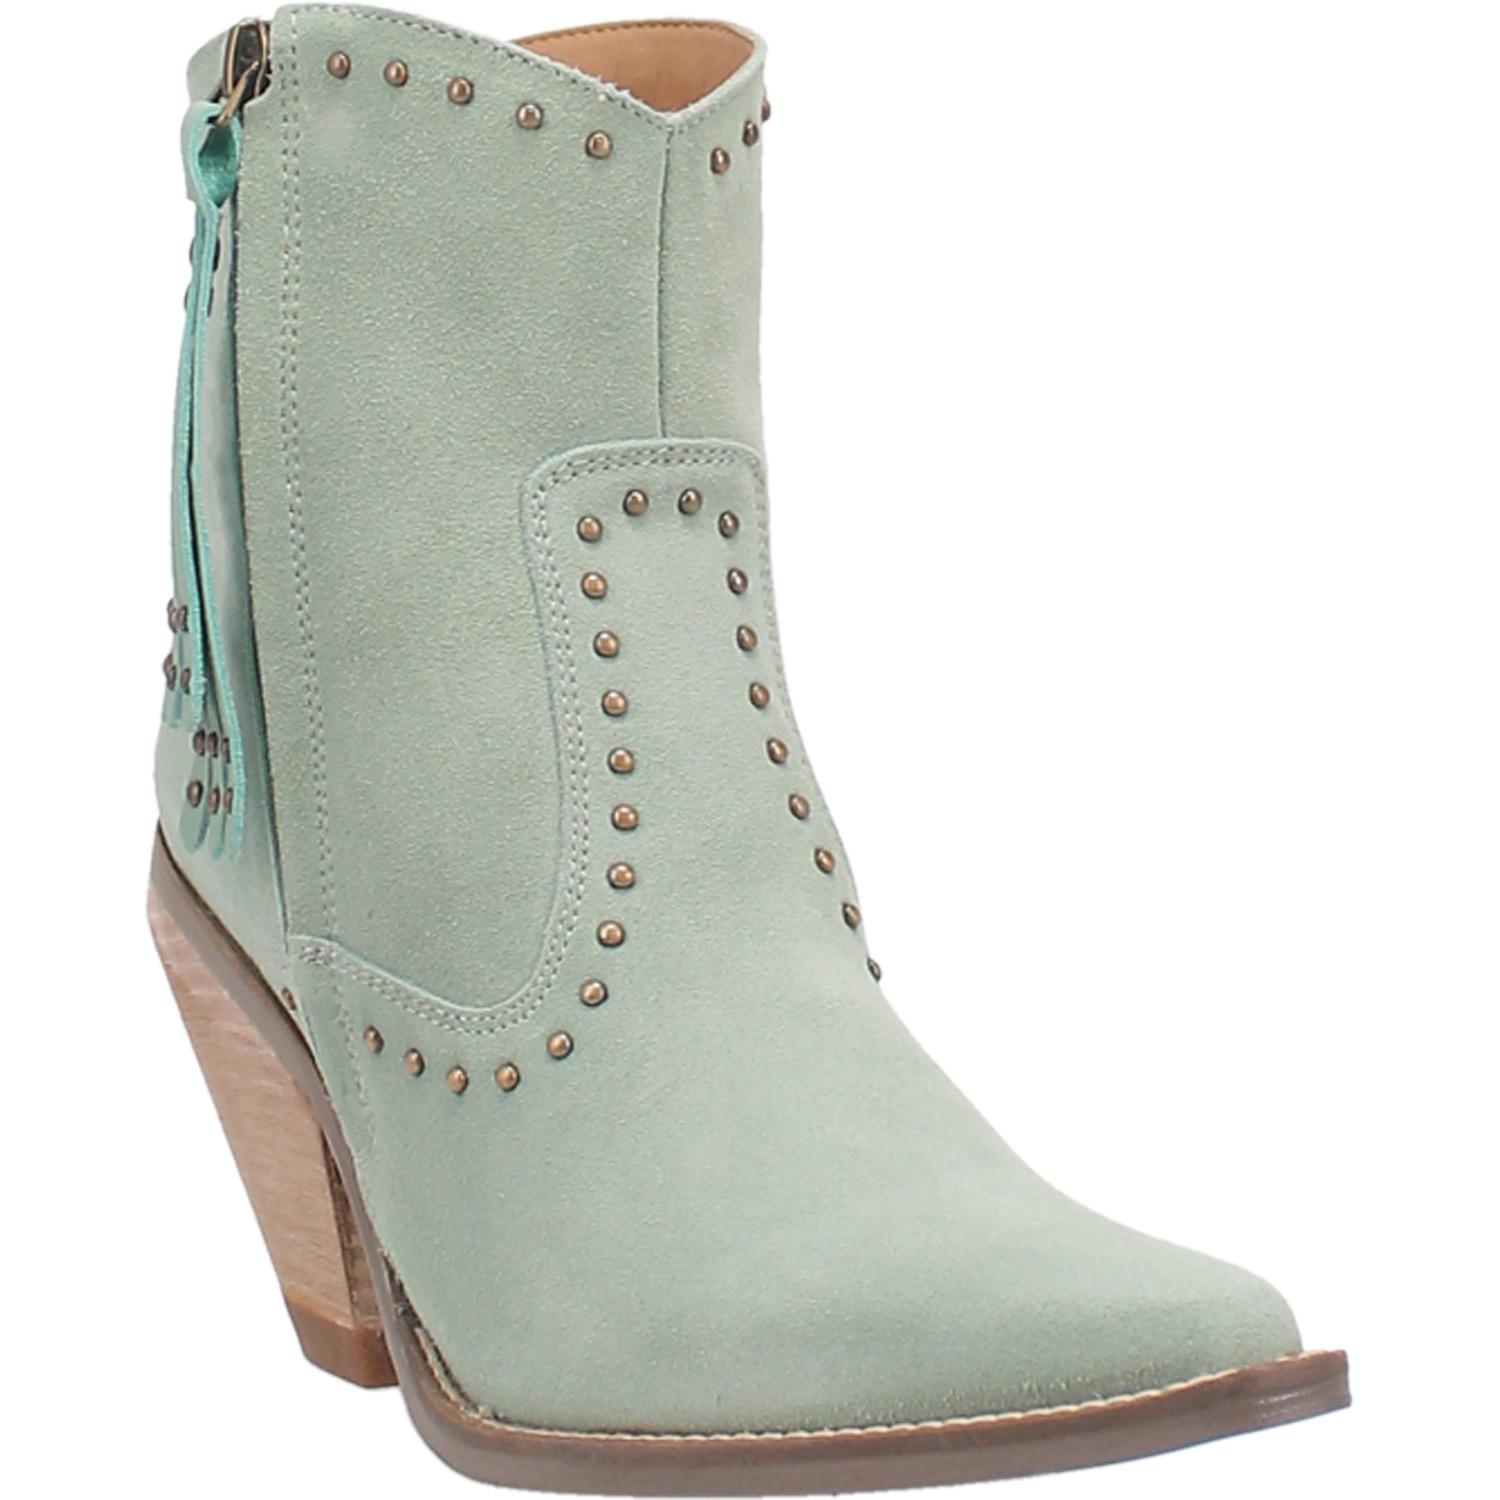 The boots shown are a low calf height bootie with a snip pointed toe made of genuine leather. The stud design and detail adds an additional edge to any outfit you pair them with. This pair is mint green suede. 